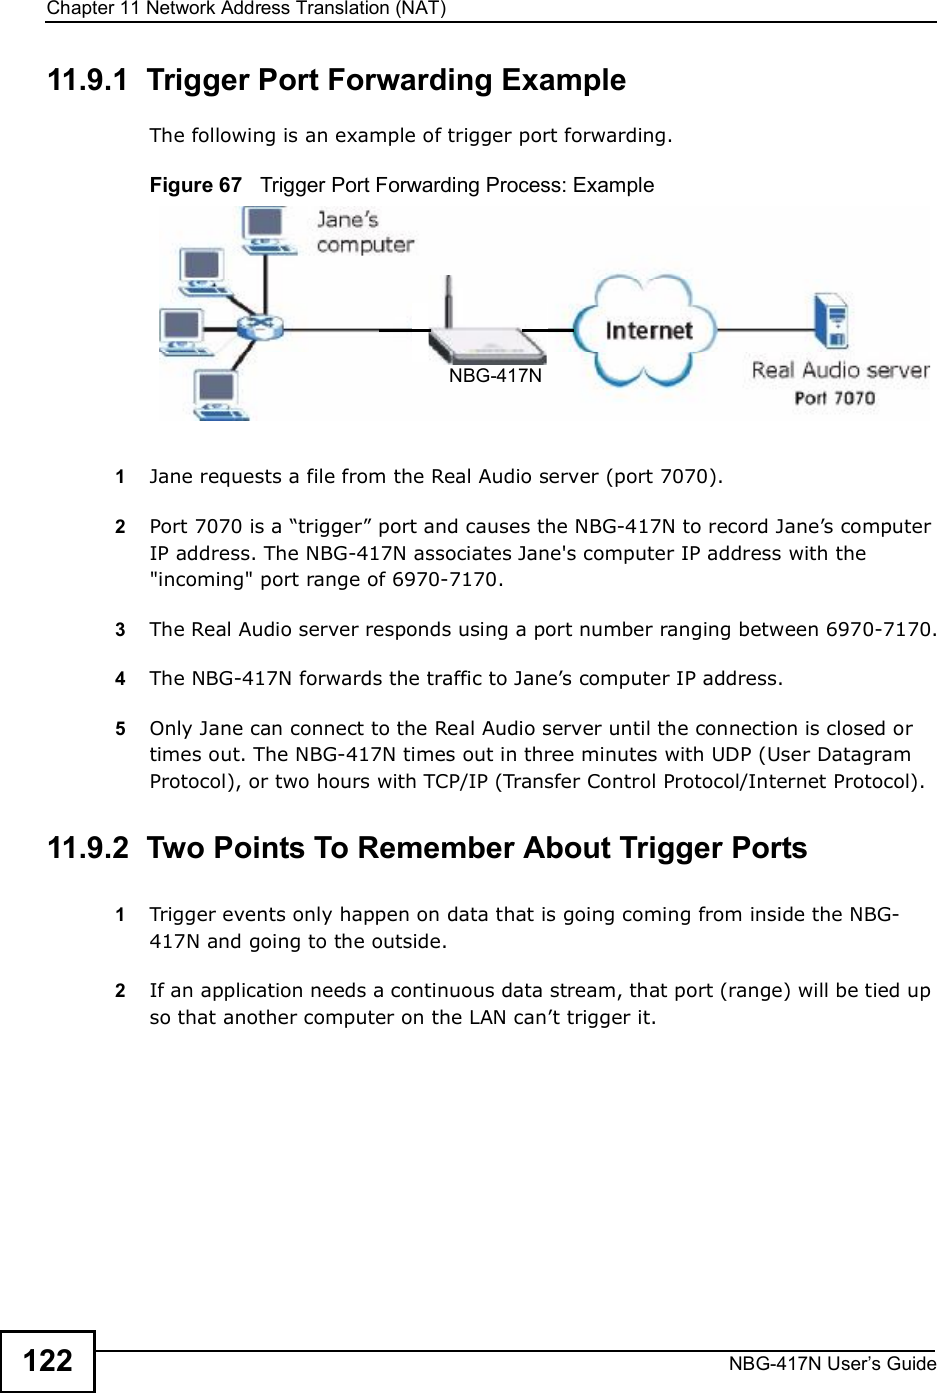 Chapter 11Network Address Translation (NAT)NBG-417N User s Guide12211.9.1  Trigger Port Forwarding Example The following is an example of trigger port forwarding.Figure 67   Trigger Port Forwarding Process: Example1Jane requests a file from the Real Audio server (port 7070).2Port 7070 is a &quot;trigger# port and causes the NBG-417N to record Jane!s computer IP address. The NBG-417N associates Jane&apos;s computer IP address with the &quot;incoming&quot; port range of 6970-7170.3The Real Audio server responds using a port number ranging between 6970-7170.4The NBG-417N forwards the traffic to Jane!s computer IP address. 5Only Jane can connect to the Real Audio server until the connection is closed or times out. The NBG-417N times out in three minutes with UDP (User Datagram Protocol), or two hours with TCP/IP (Transfer Control Protocol/Internet Protocol). 11.9.2  Two Points To Remember About Trigger Ports1Trigger events only happen on data that is going coming from inside the NBG-417N and going to the outside.2If an application needs a continuous data stream, that port (range) will be tied up so that another computer on the LAN can!t trigger it.NBG-417N